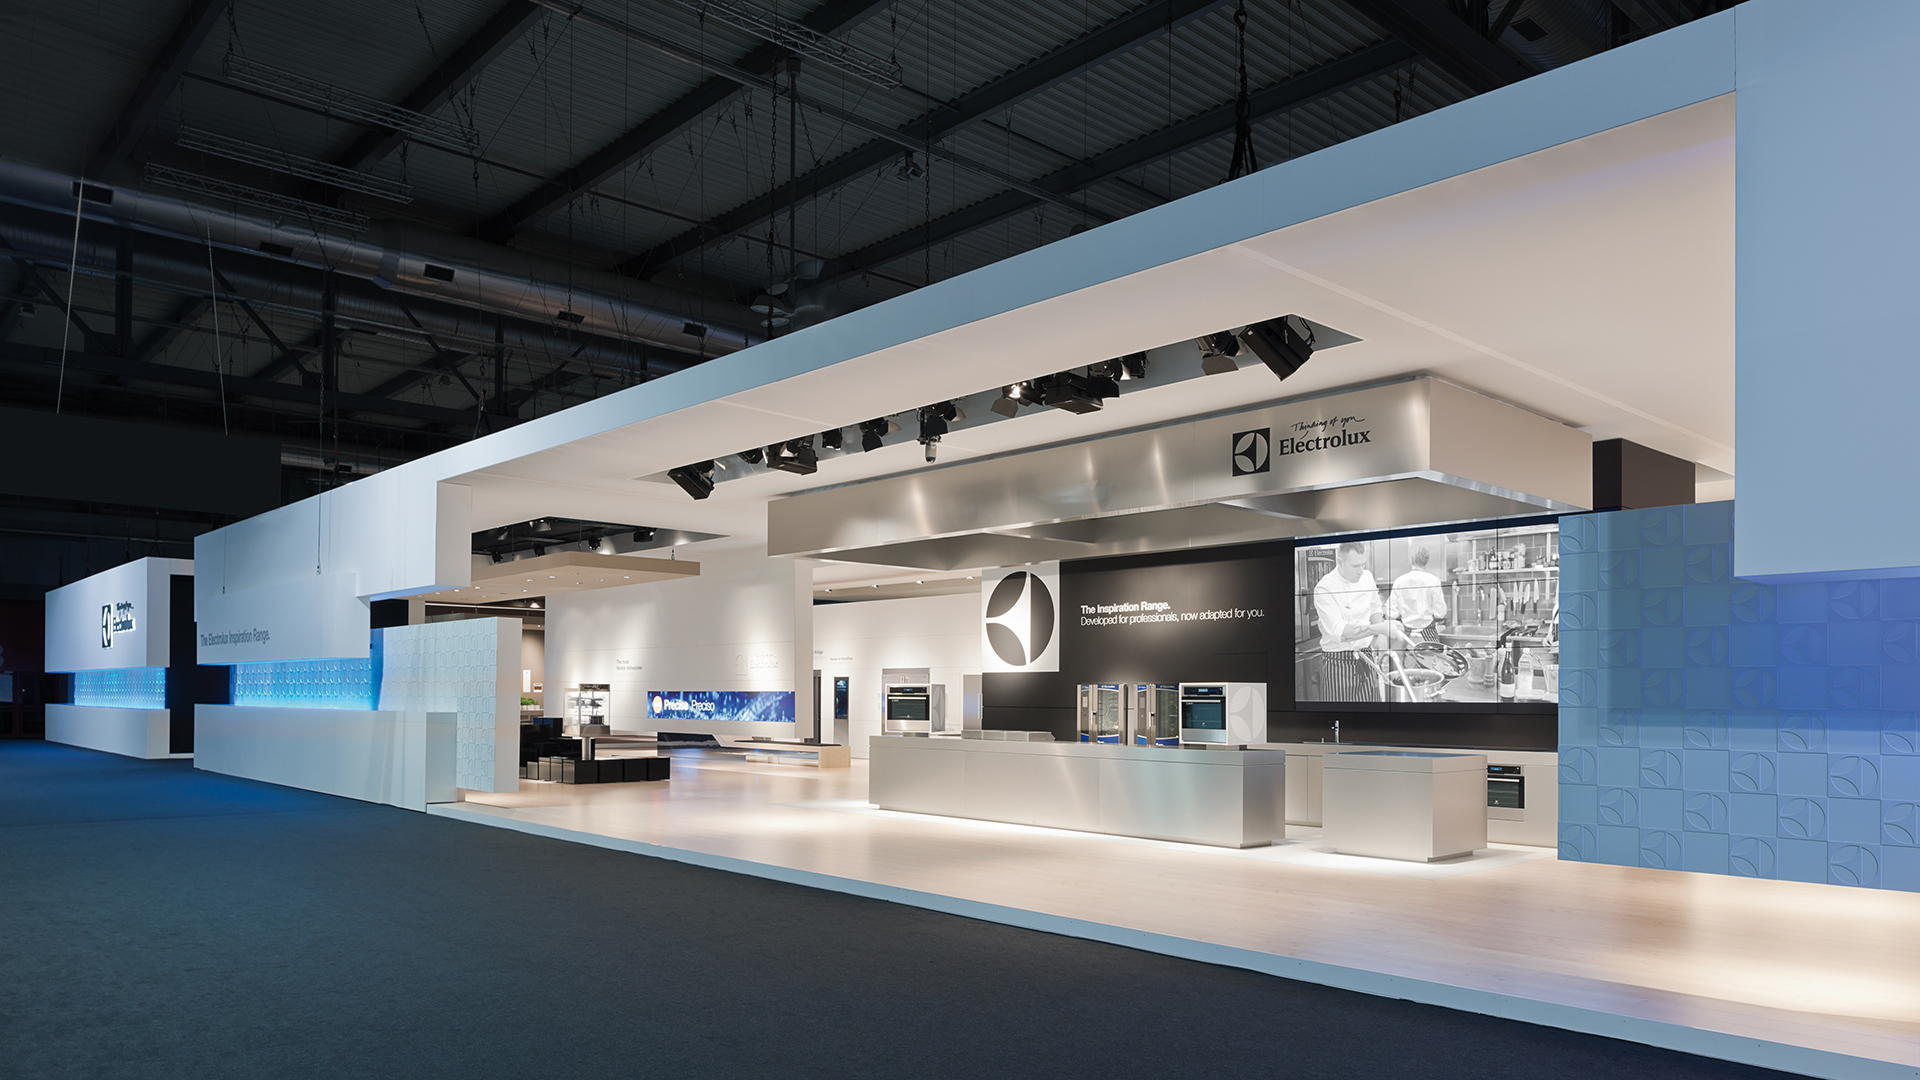 Dart stages the Electrolux fair stand at the EuroCucina 2012